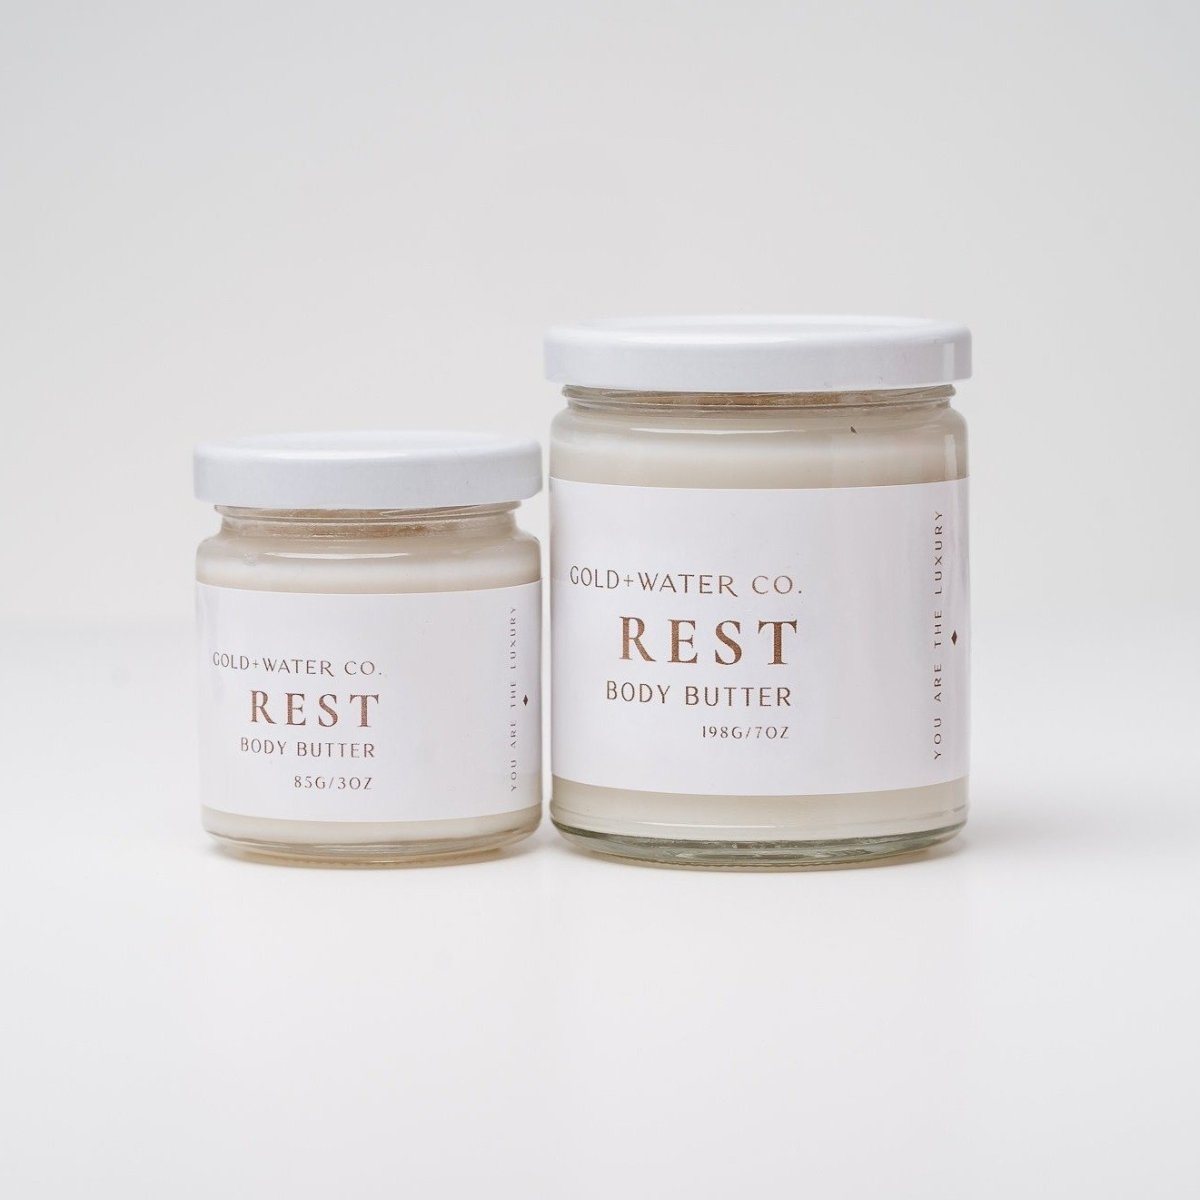 Body Butter - A luxury for your skin made with shea butter